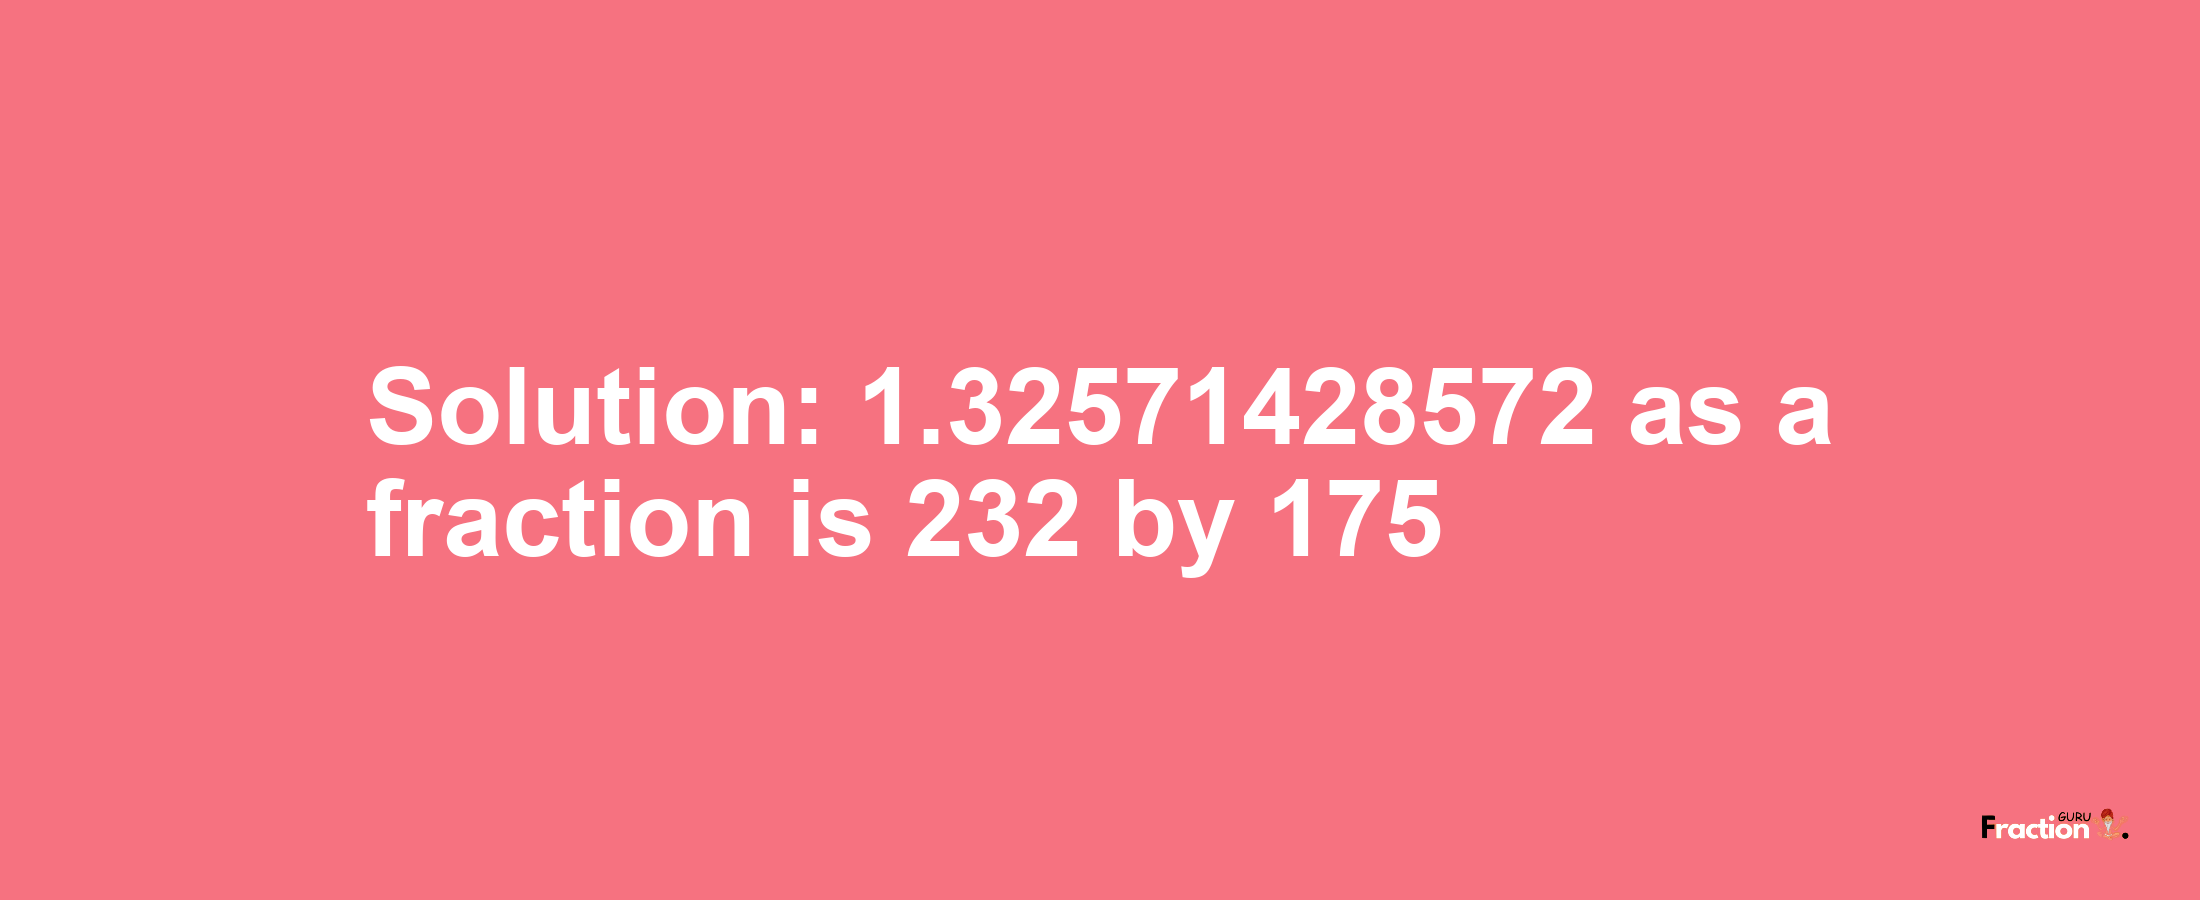 Solution:1.32571428572 as a fraction is 232/175